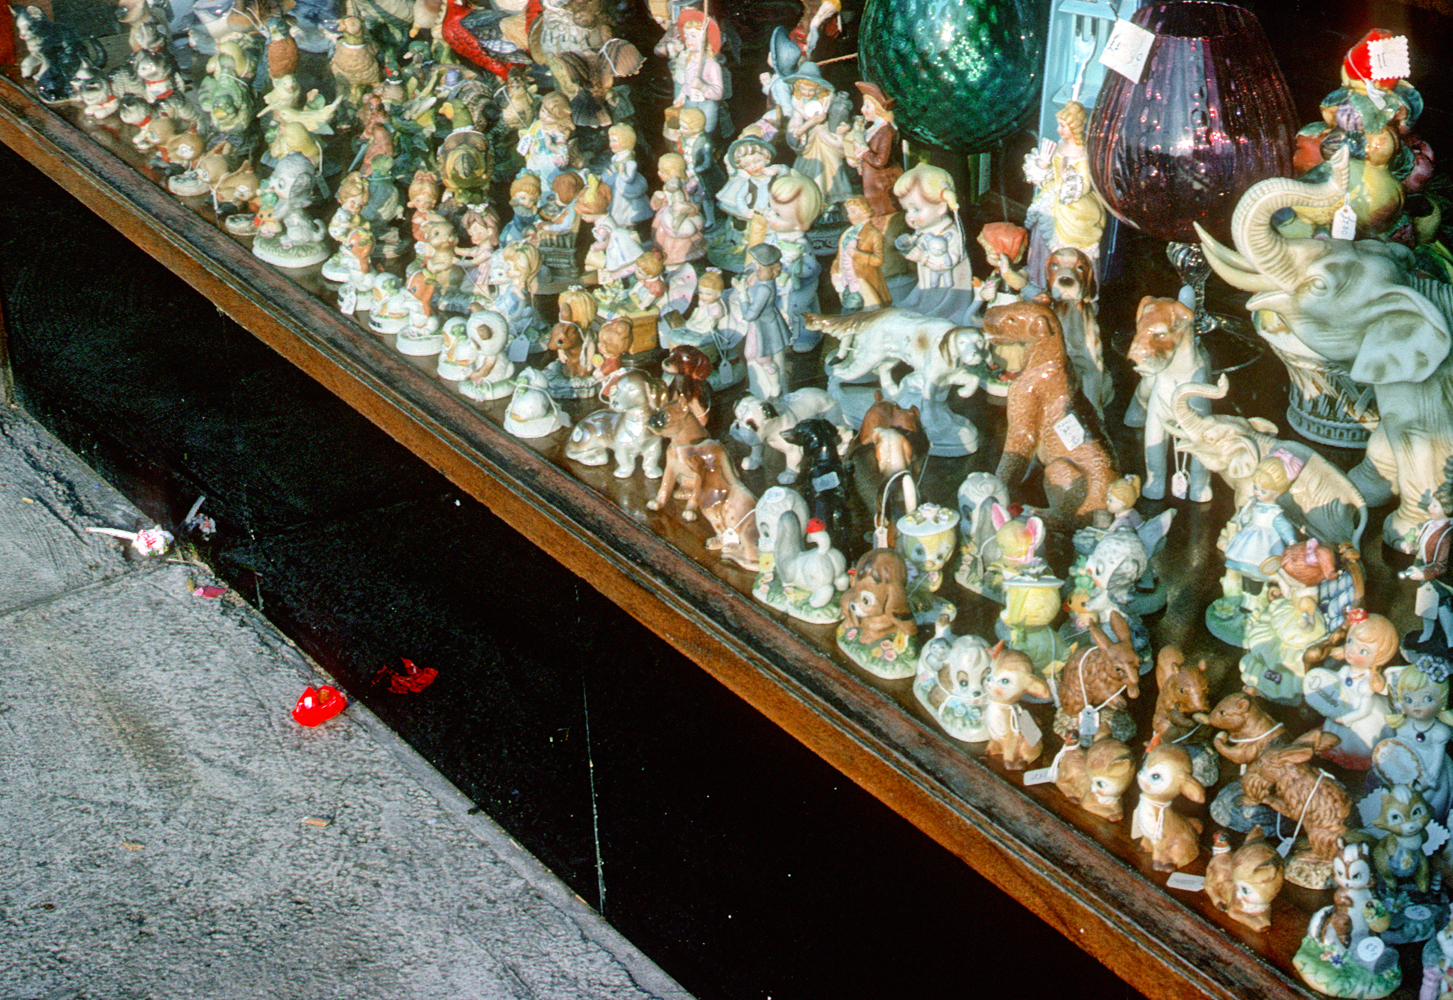 Large collection of miniatures displayed in shop window